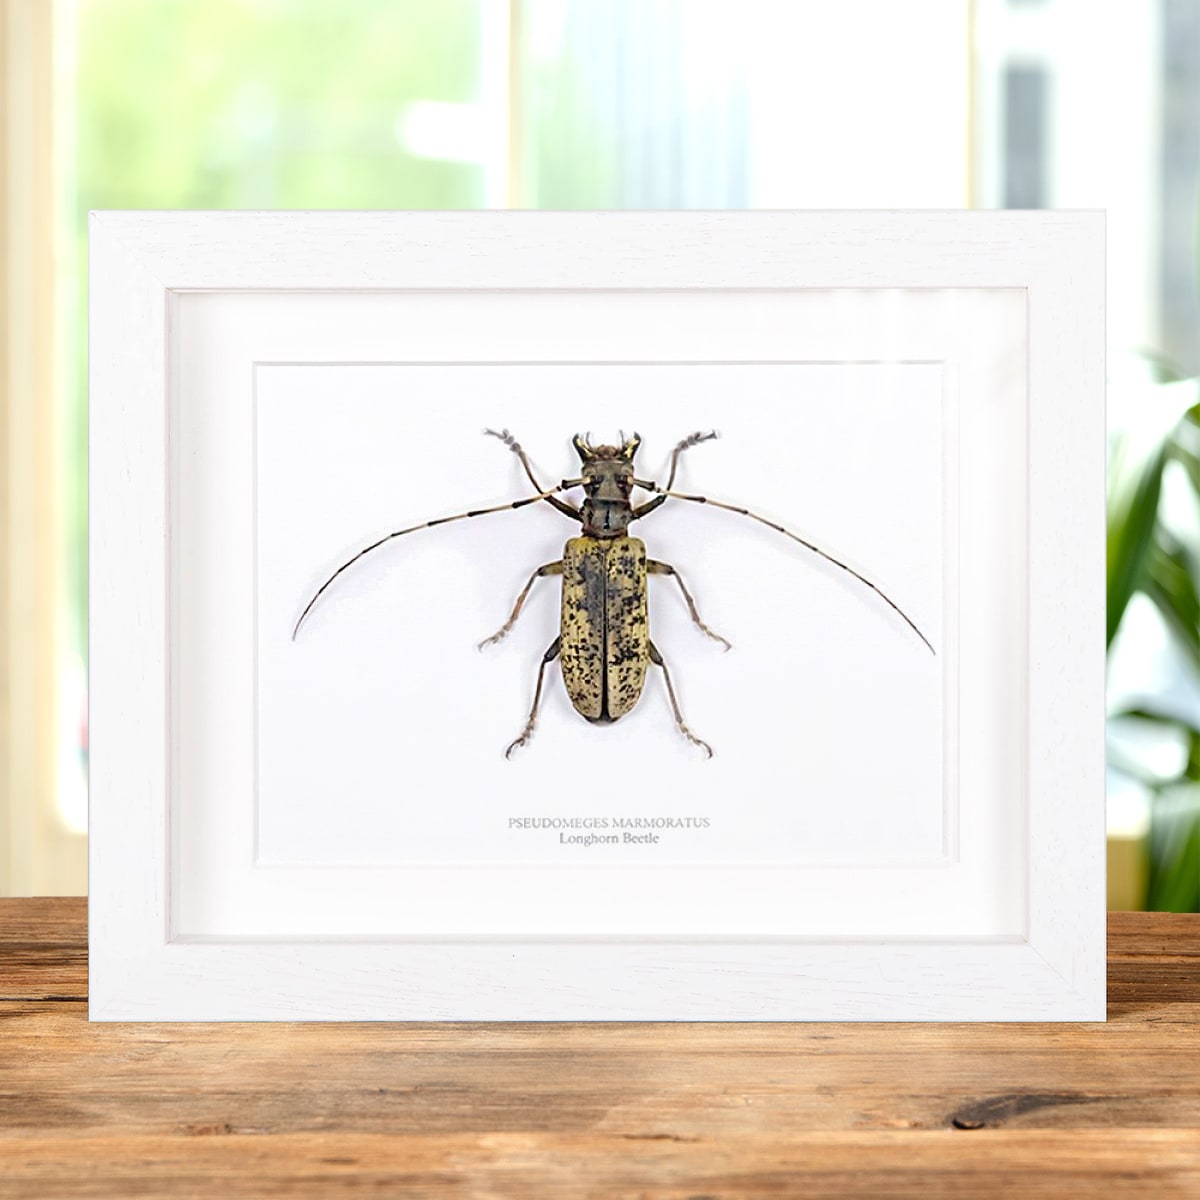 Giant Female Longhorn Beetle in Box Frame (Pseudomeges marmoratus)